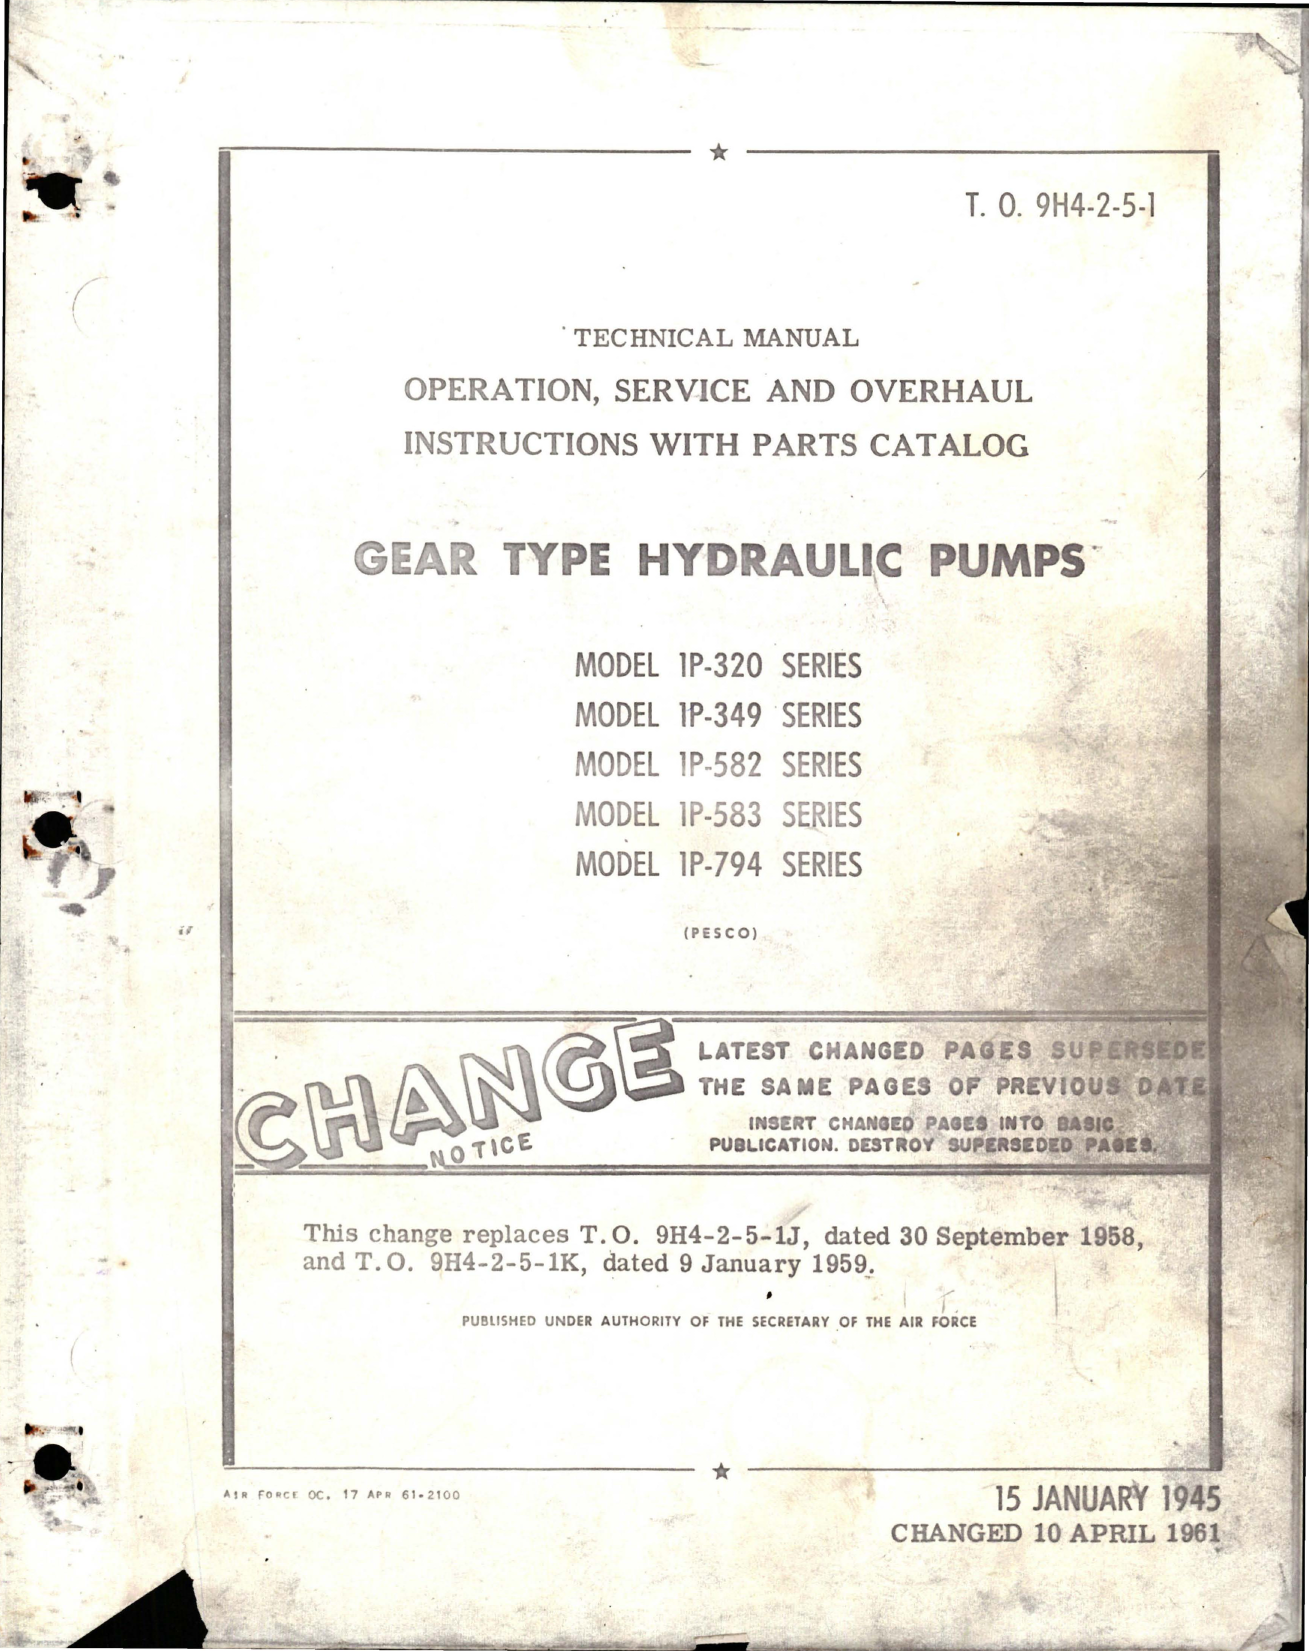 Sample page 1 from AirCorps Library document: Operation, Service and Overhaul Instructions with Parts Catalog for Gear Type Hydraulic Pumps 